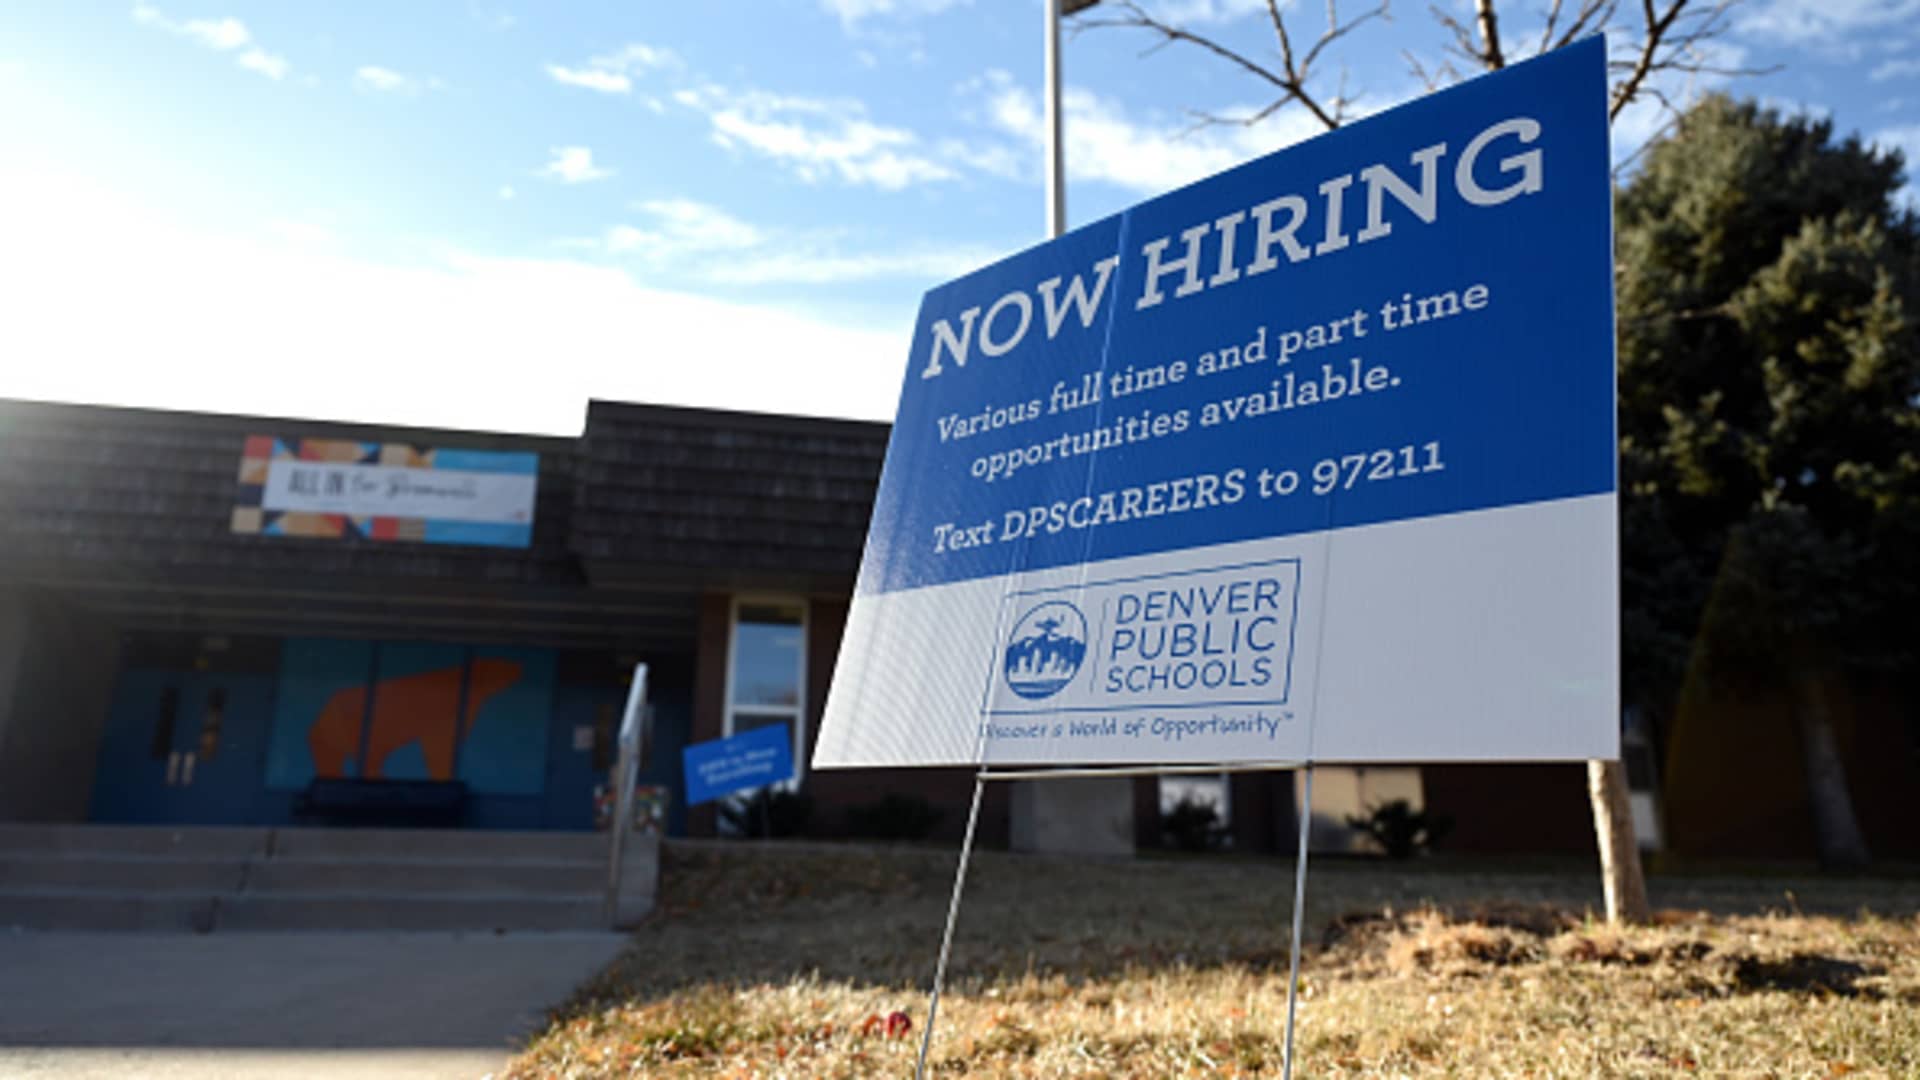 Now Hiring sign of Denver Public School placed in front of Bromwell Elementary School in Denver, Colorado on Tuesday, December 7, 2021.